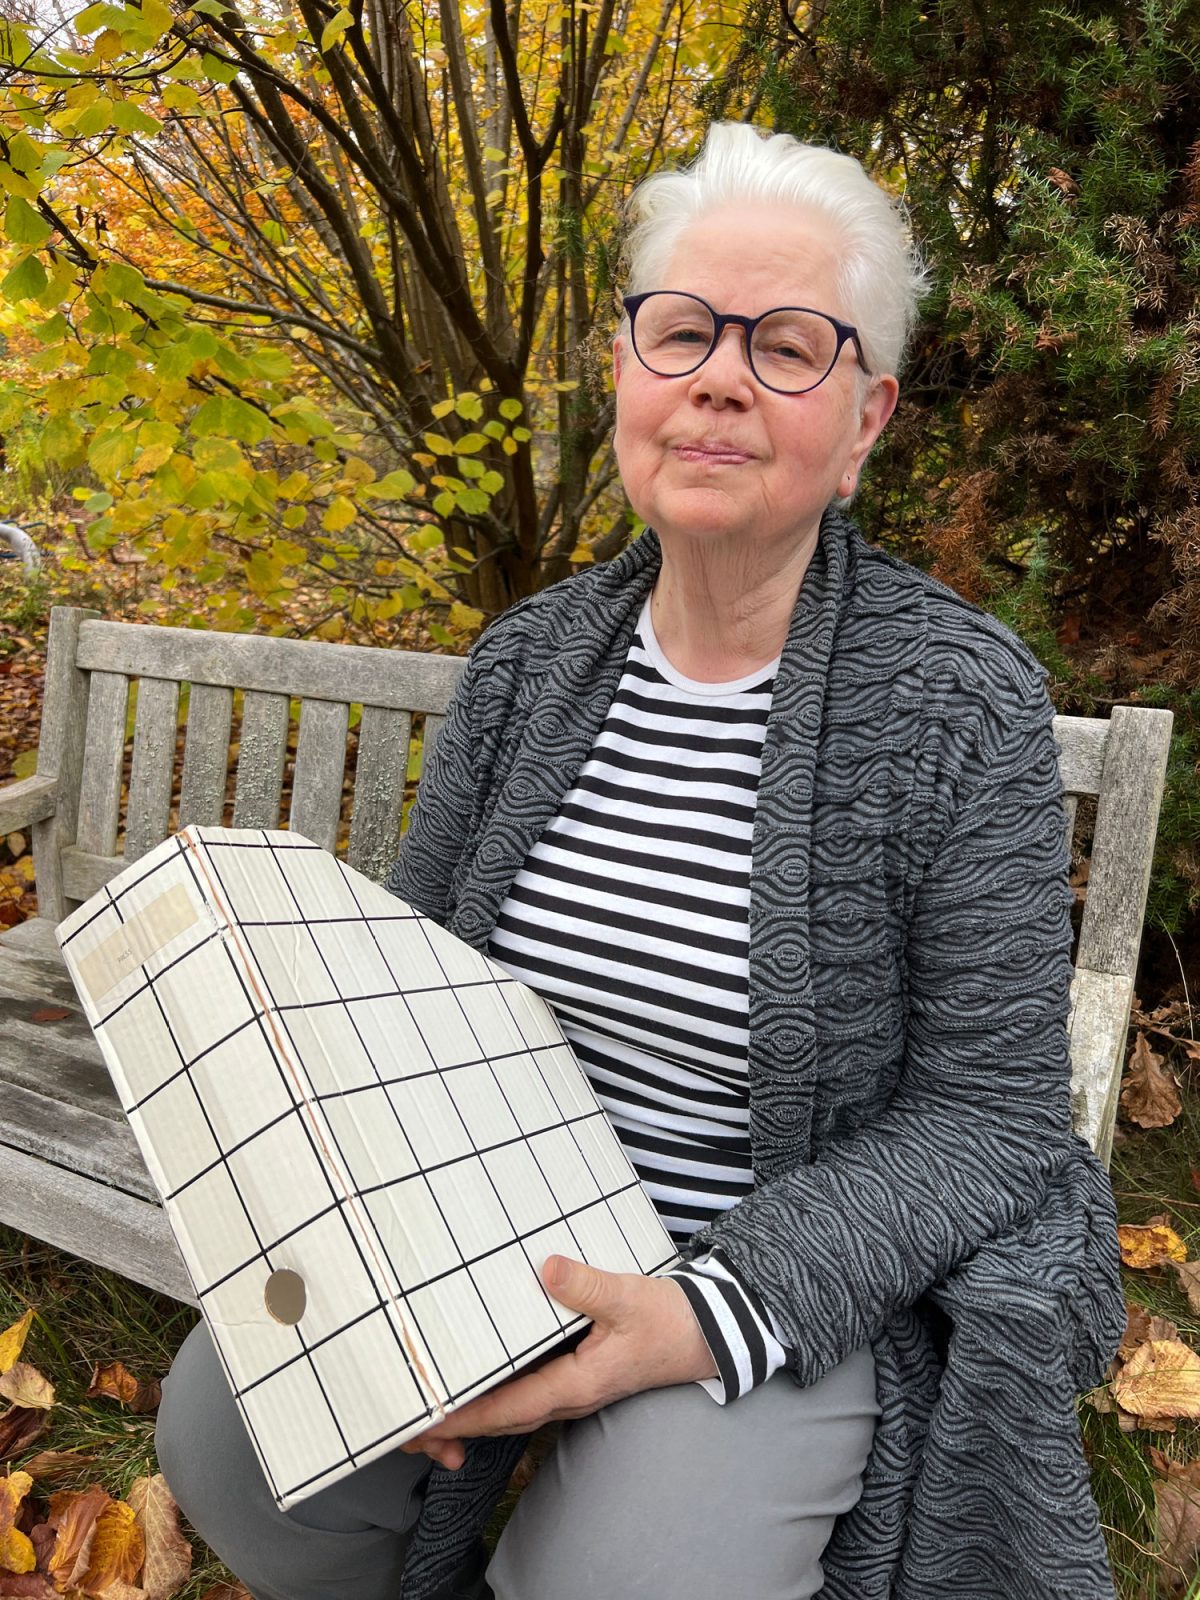 Vivianne Sjölin in a grey cardigan and striped shirt sits on a bench holding a black and white check magazine holder.